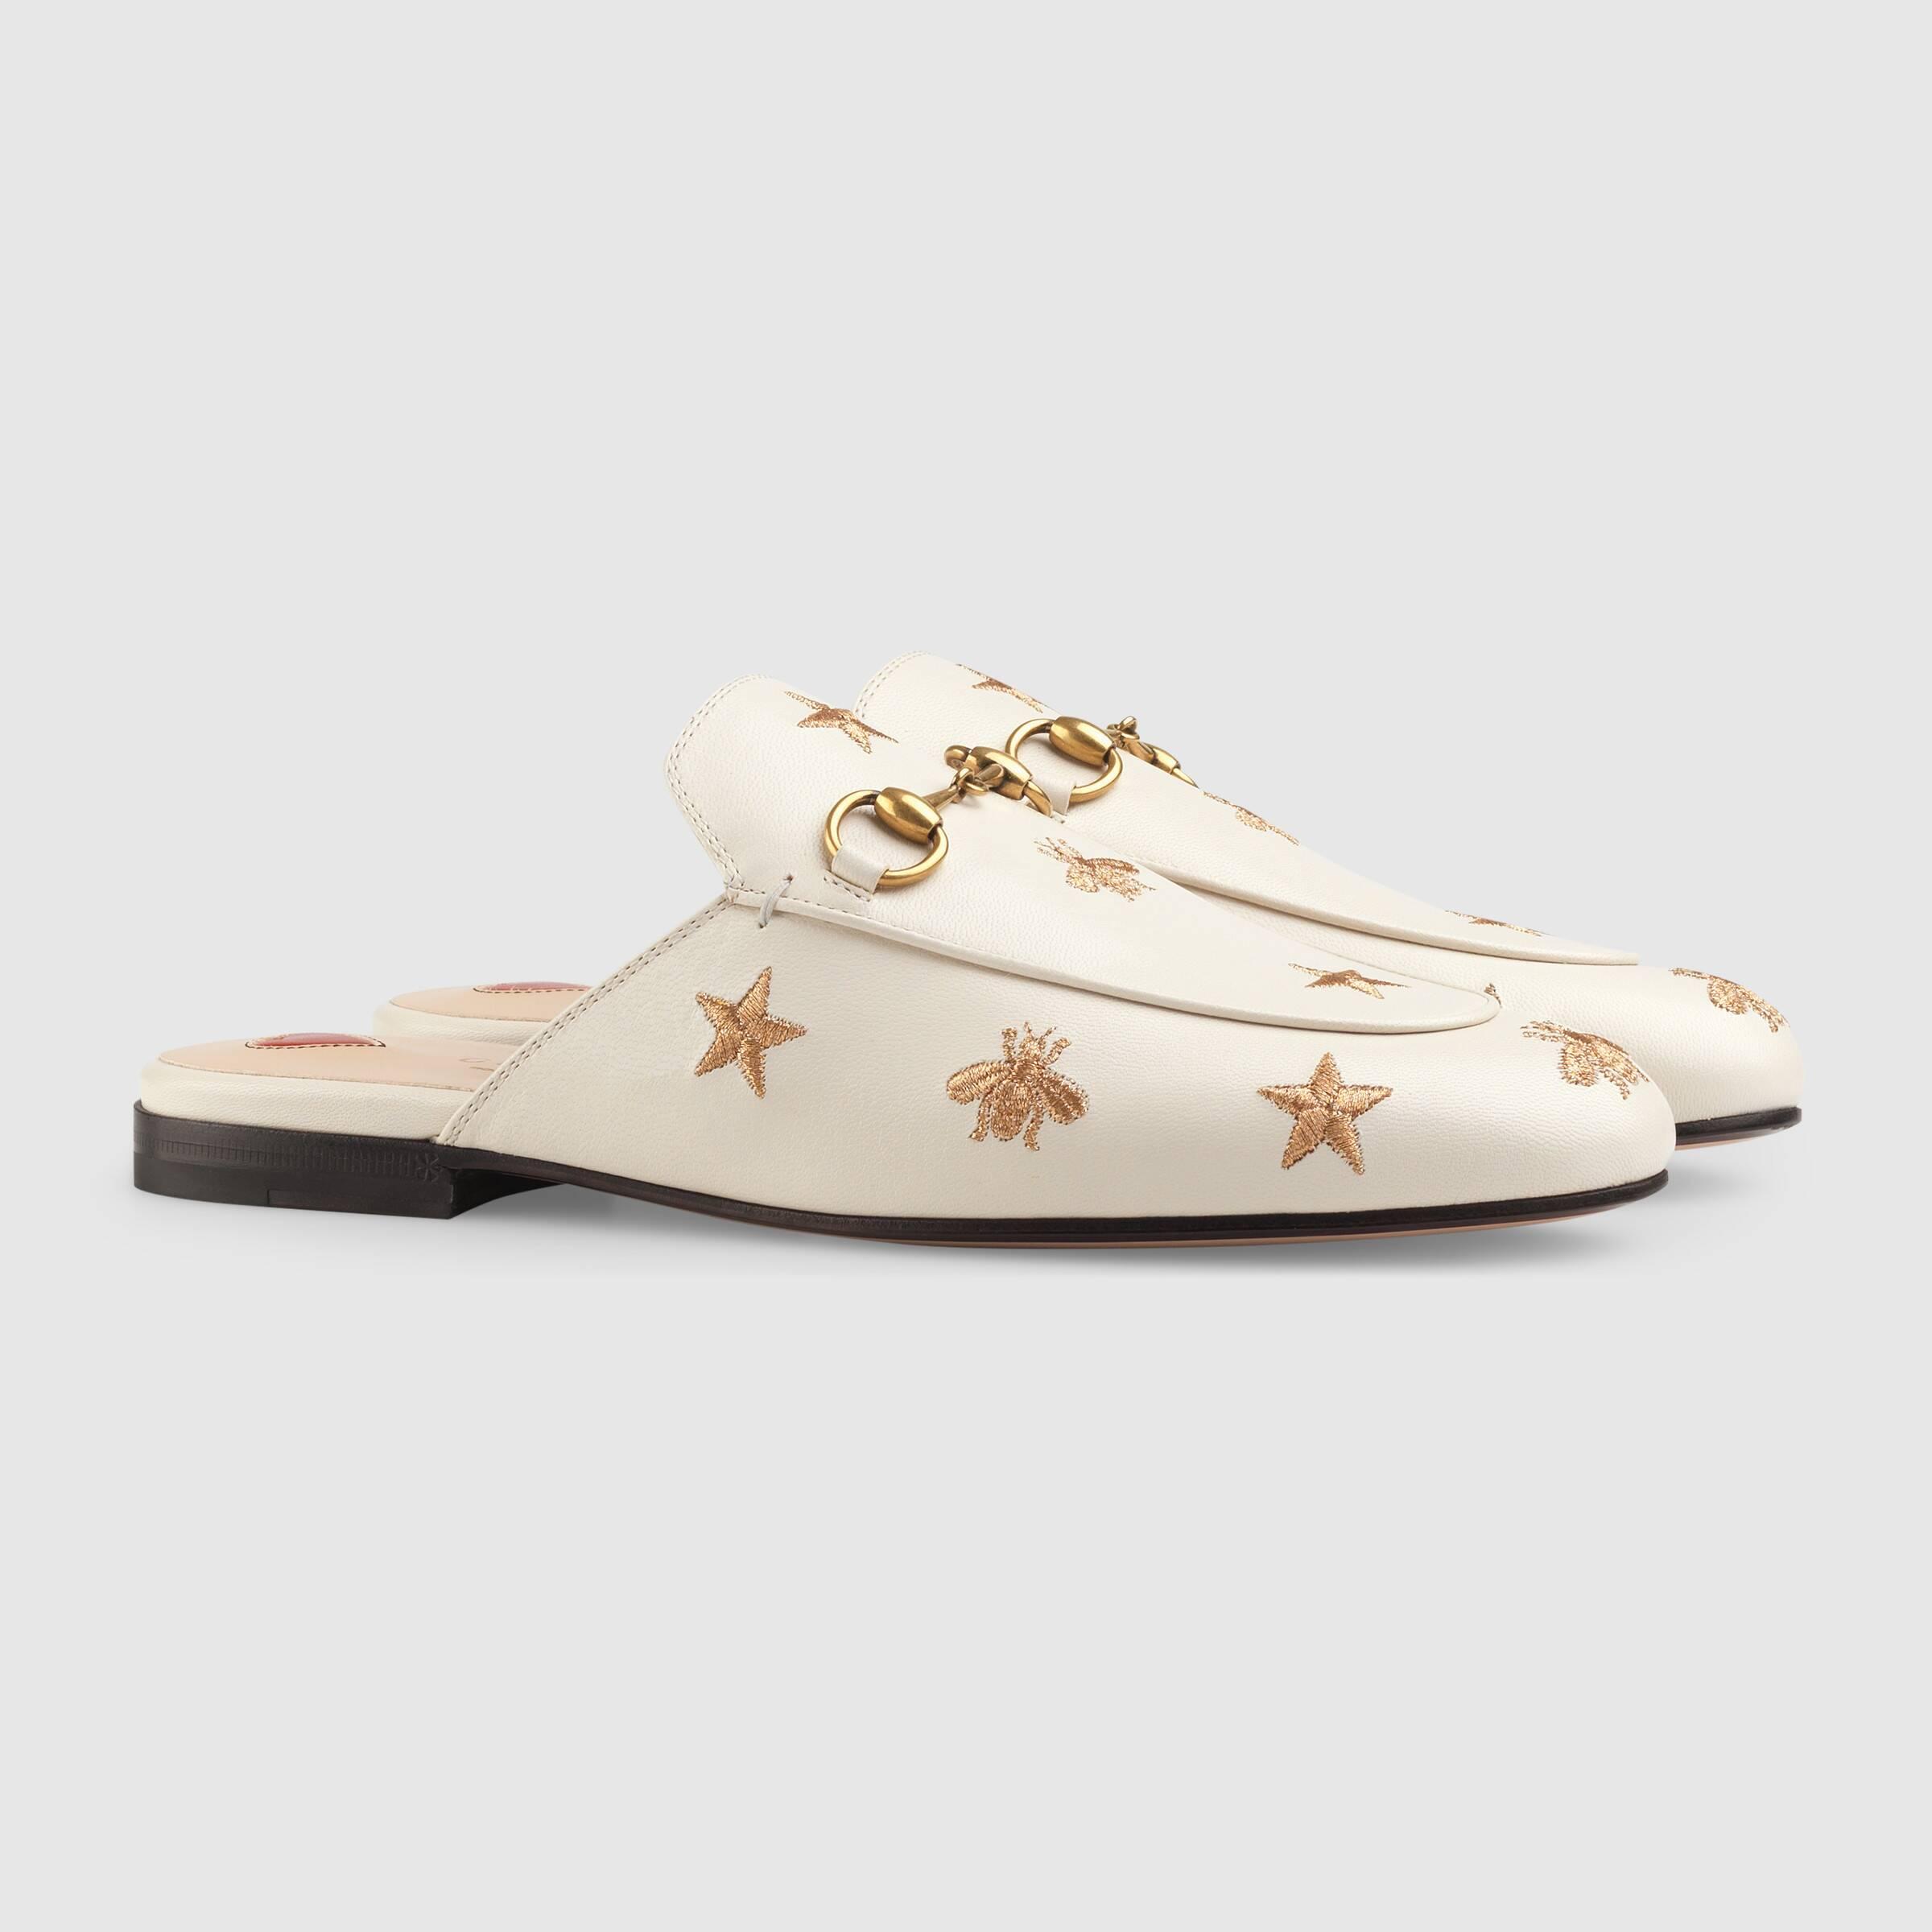 gucci princetown embroidered leather slipper